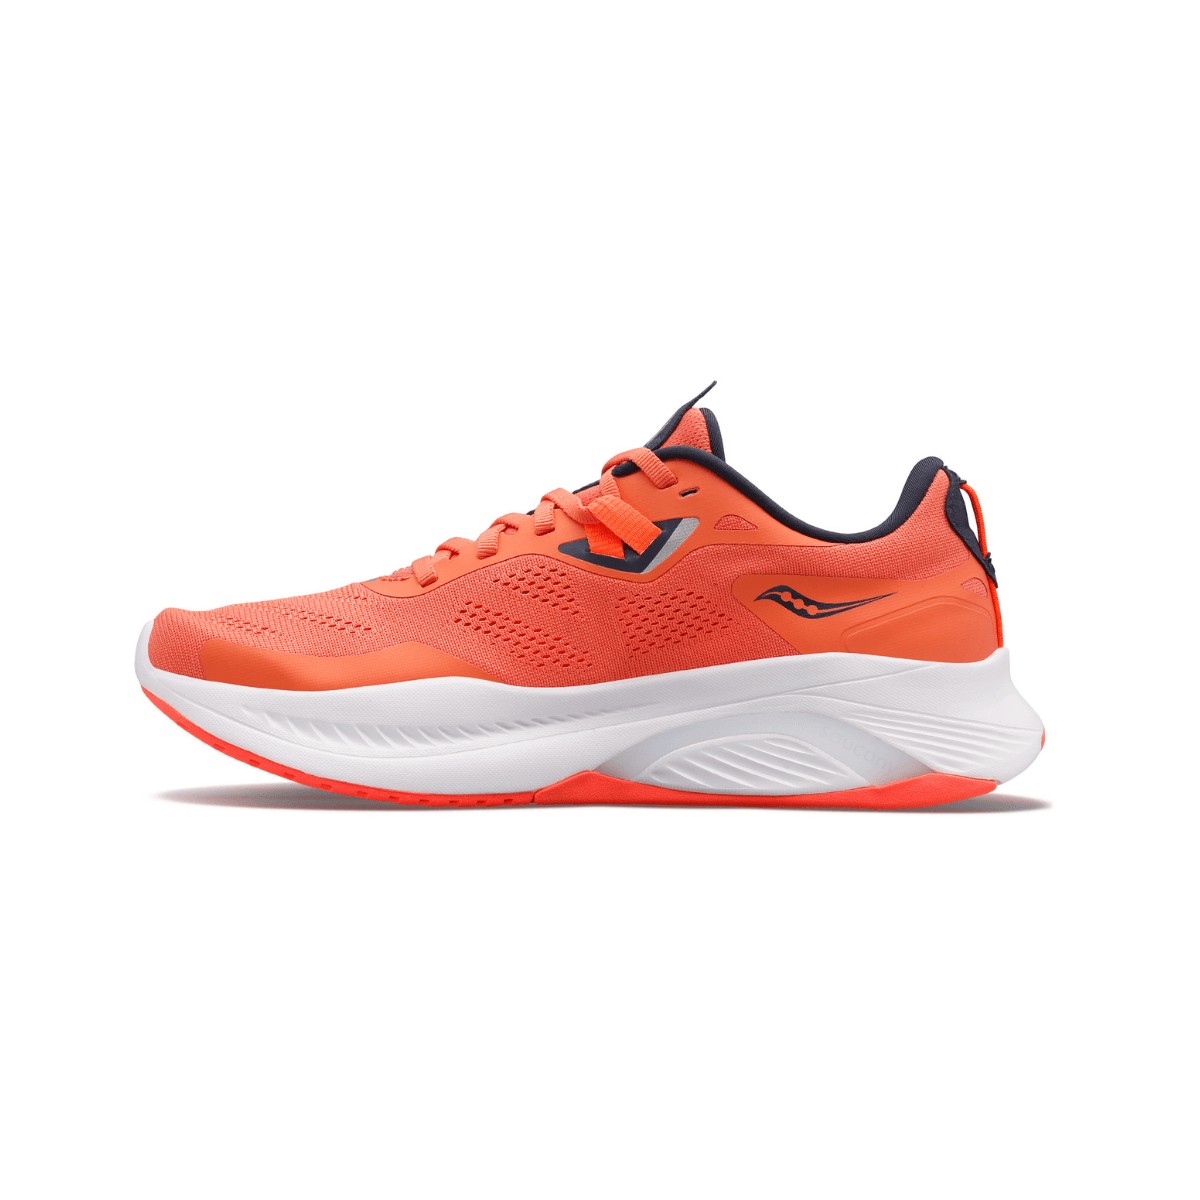 Buy Saucony Guide 15 at the Price